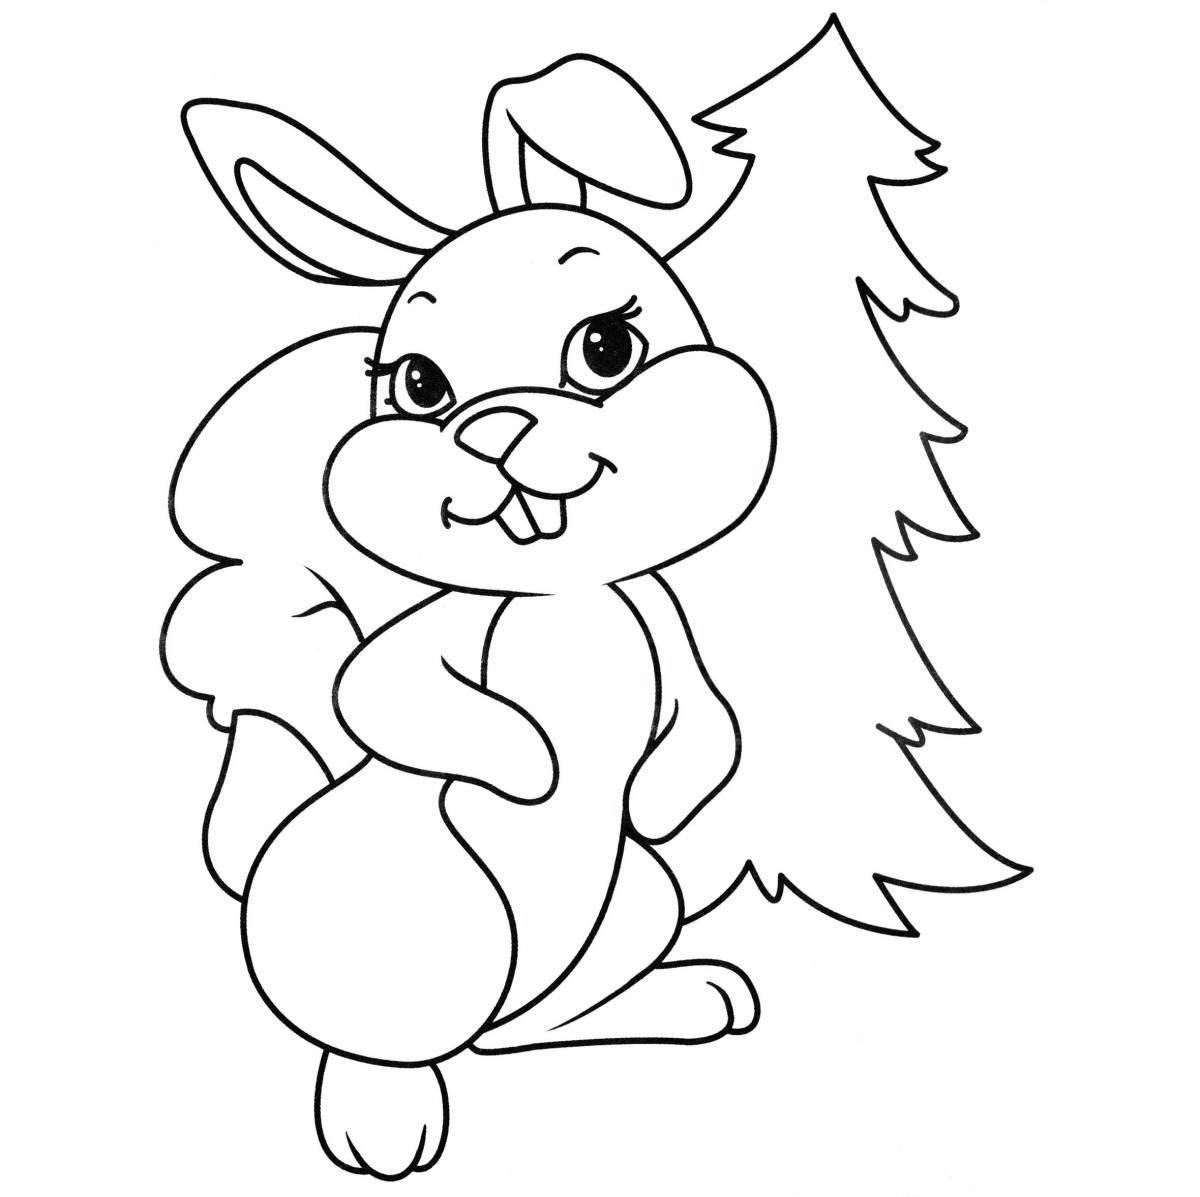 Colorful new year bunny coloring book